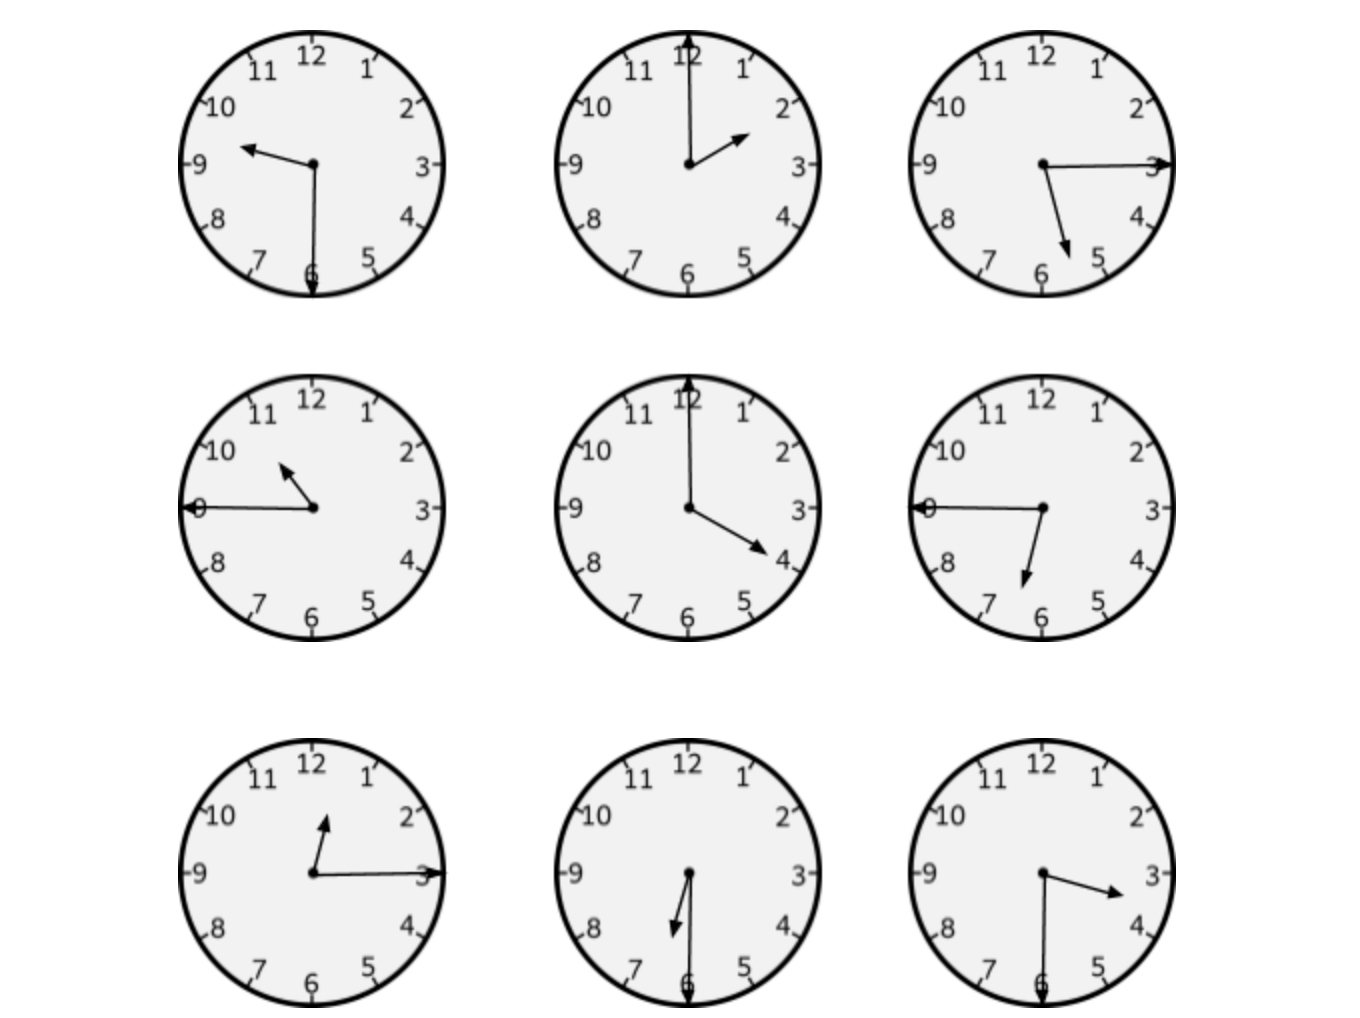 Alt text = 9 clocks showing different times: 9:30, 2:00, 5:15, 10:45, 4:00, 6:45, 12:15, 6:30, 3:30.